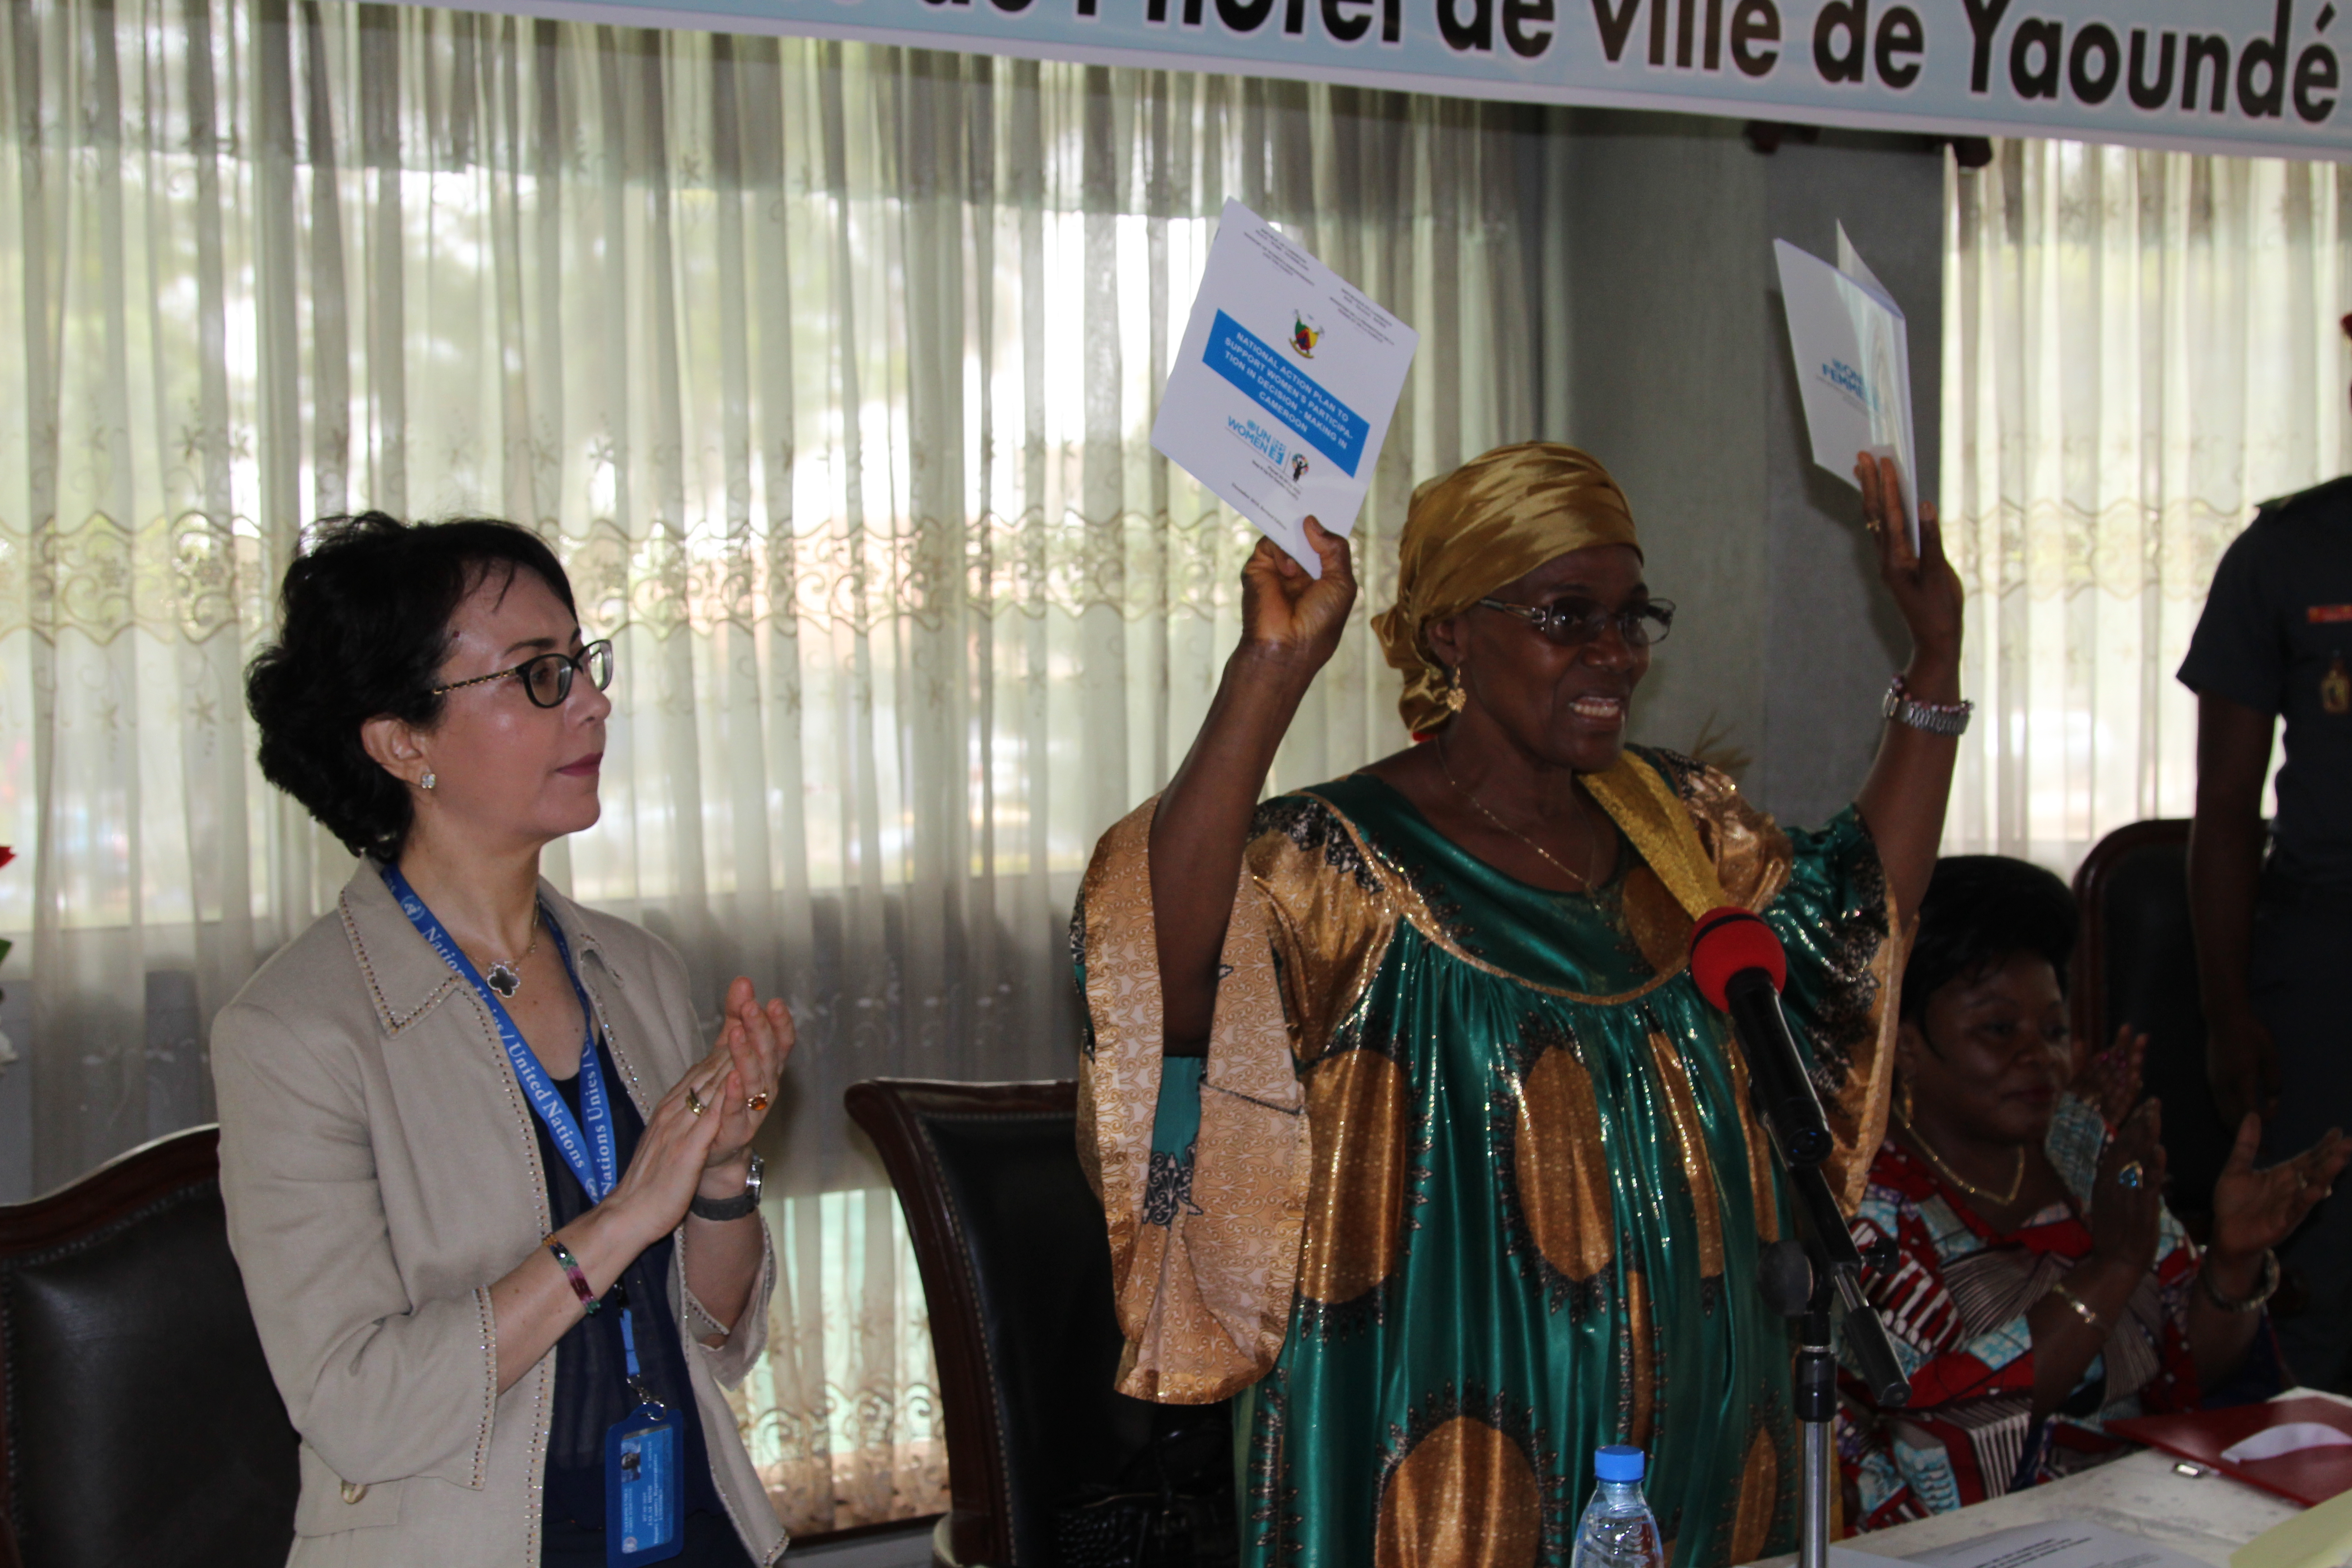 Minister Abena Ondoa Marie-Therese, MINPROFF, officially presenting the political education manual and national action plan to support women’s participation in decision making. Photo credit: Teclaire Same, UN Women.